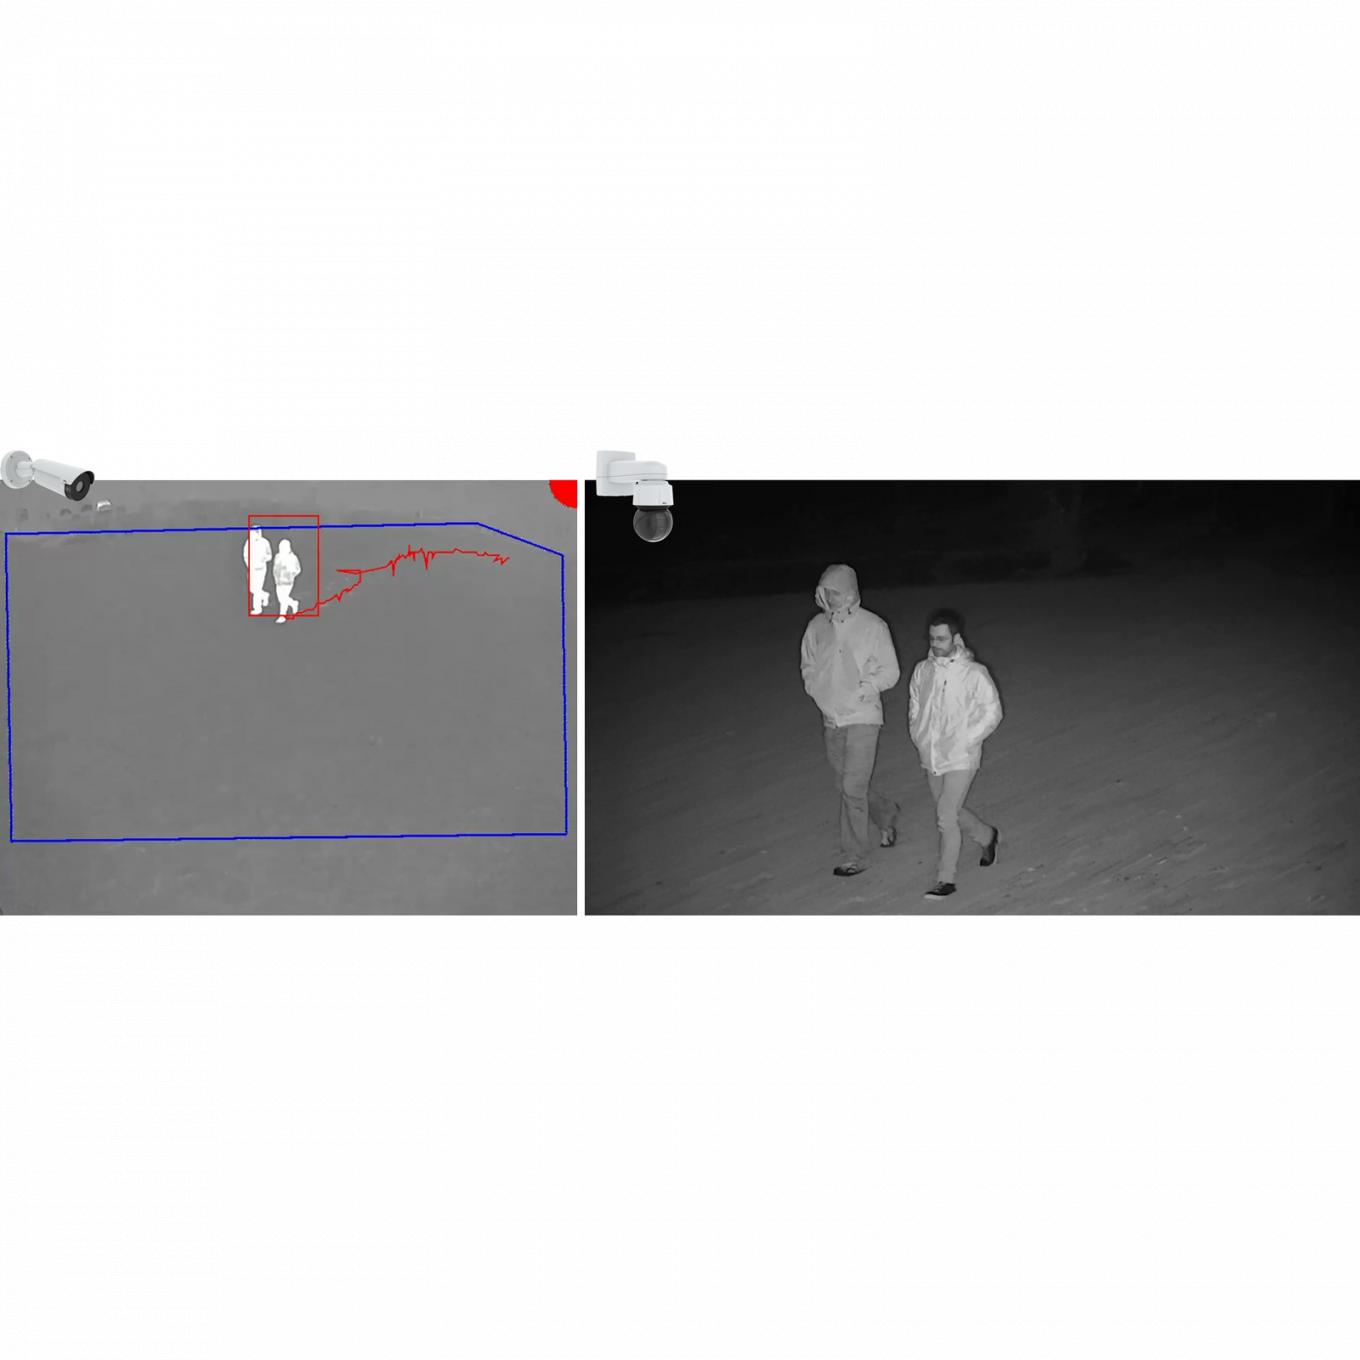 AXIS Perimeter Defender PTZ Autotracking, black and white photo of two men walking